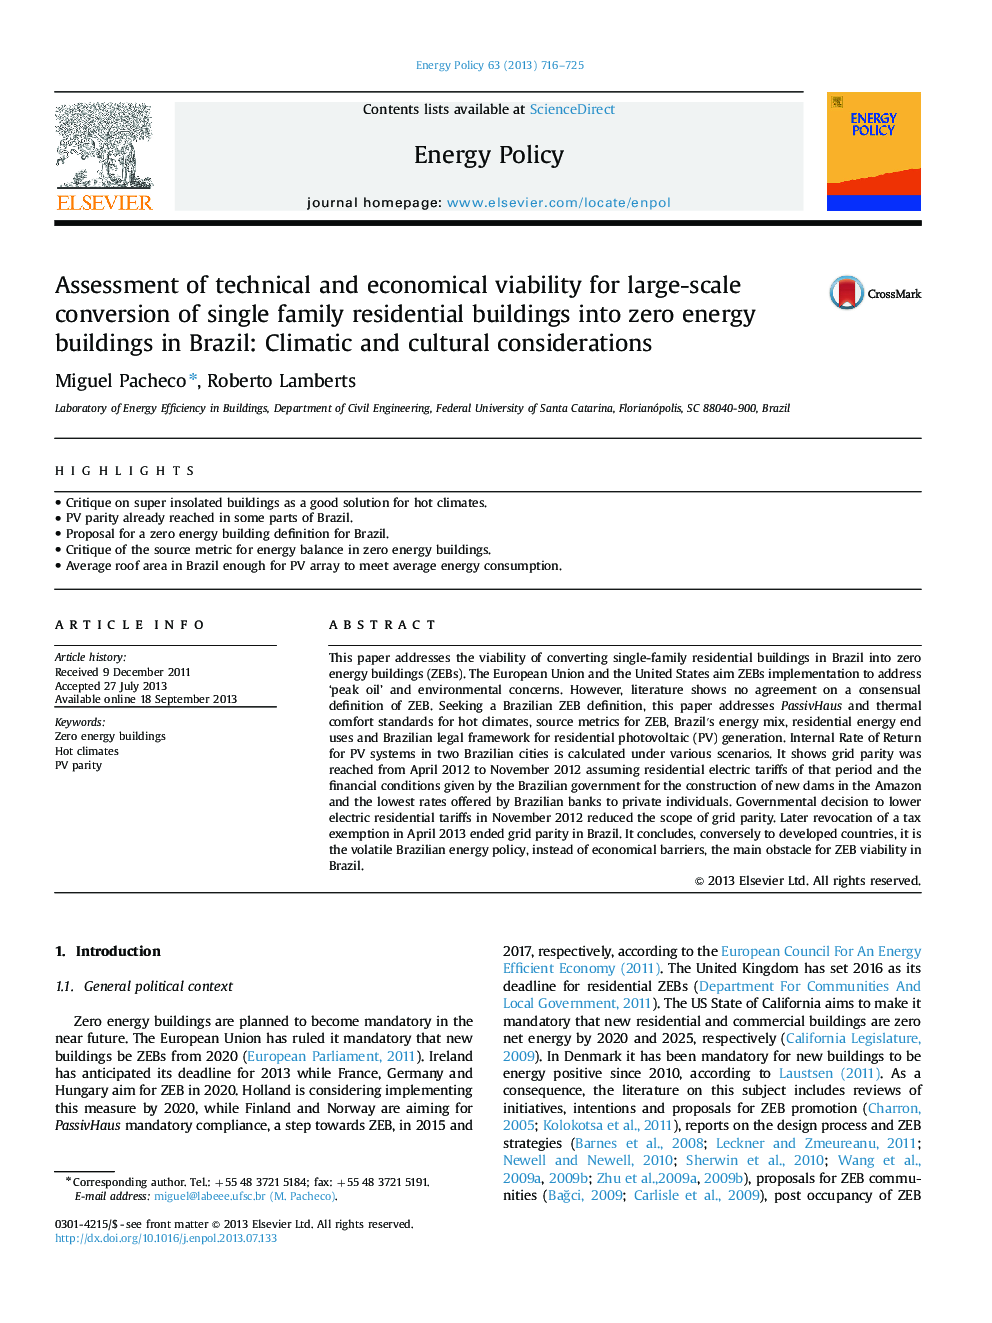 Assessment of technical and economical viability for large-scale conversion of single family residential buildings into zero energy buildings in Brazil: Climatic and cultural considerations